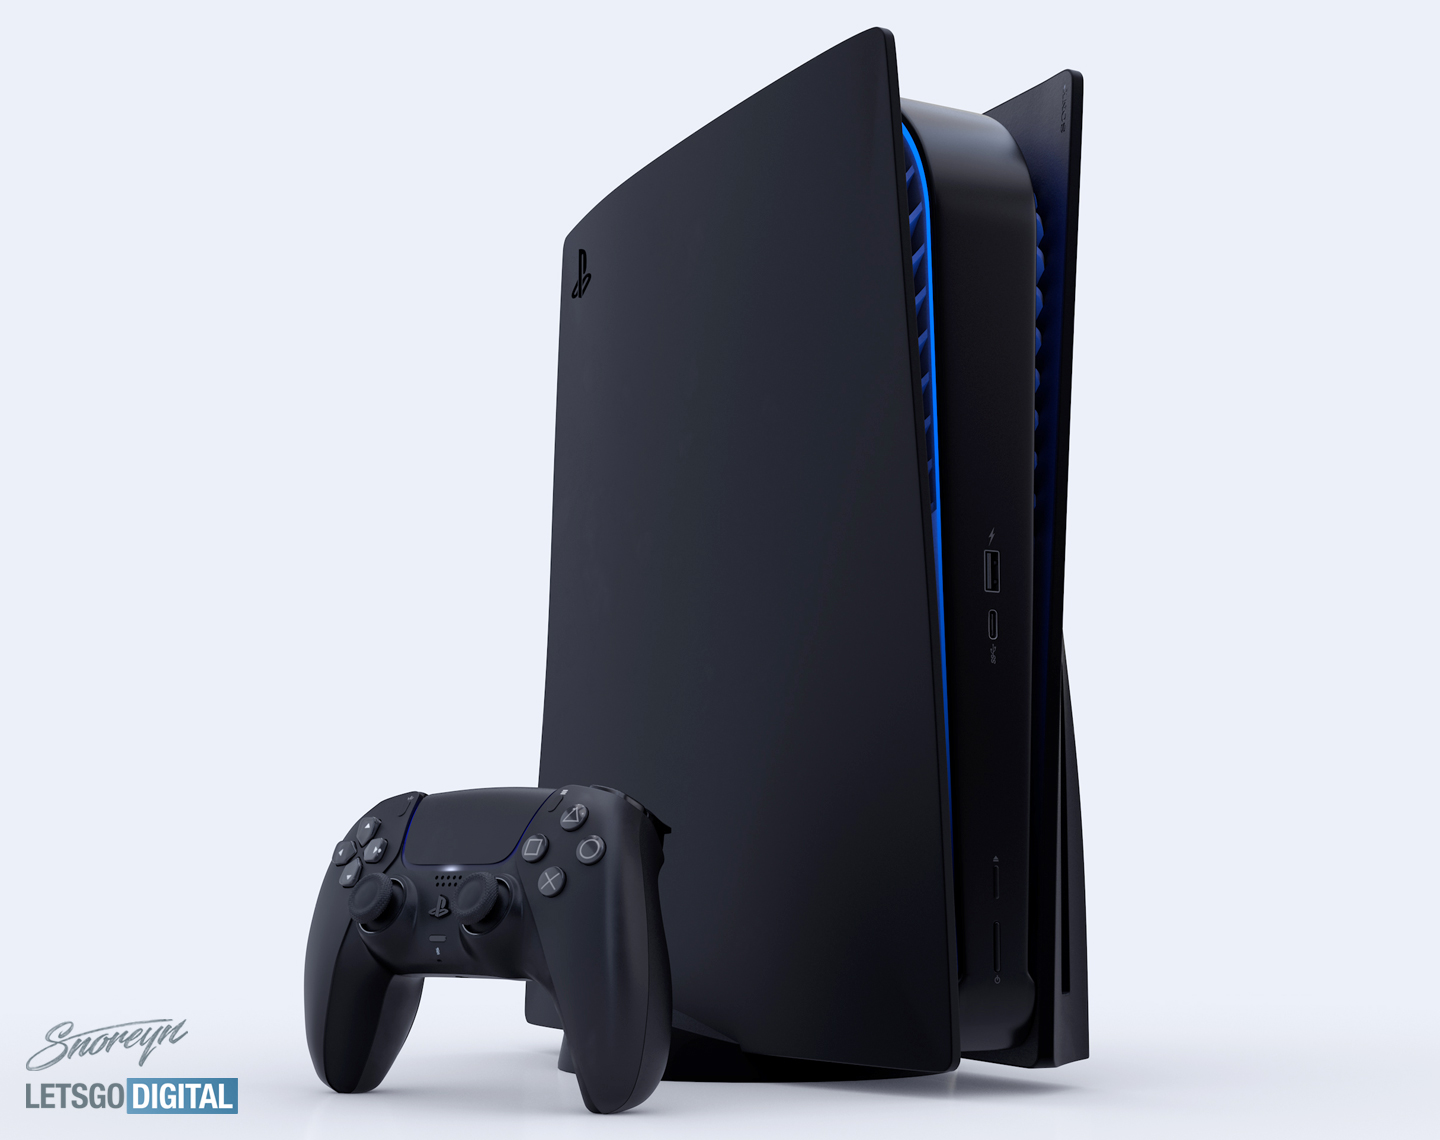 PS5 price officially announced by Sony for regular and Digital